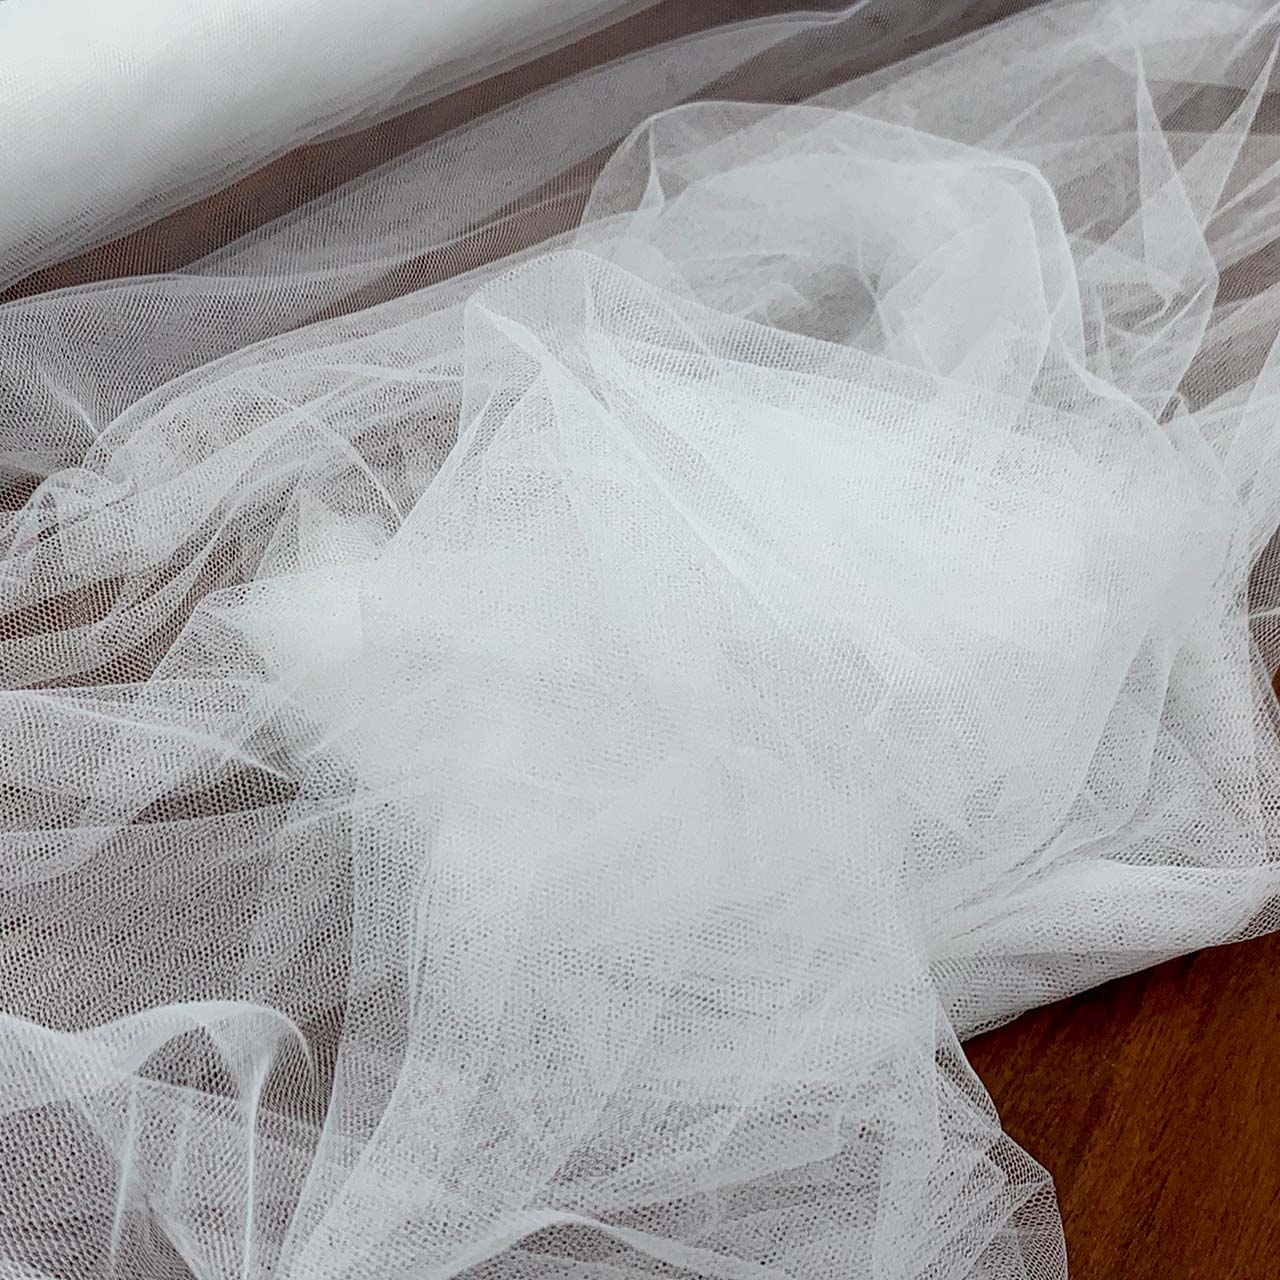 White bridal tulle veil fabric 300cm wide - fine delicate net - by